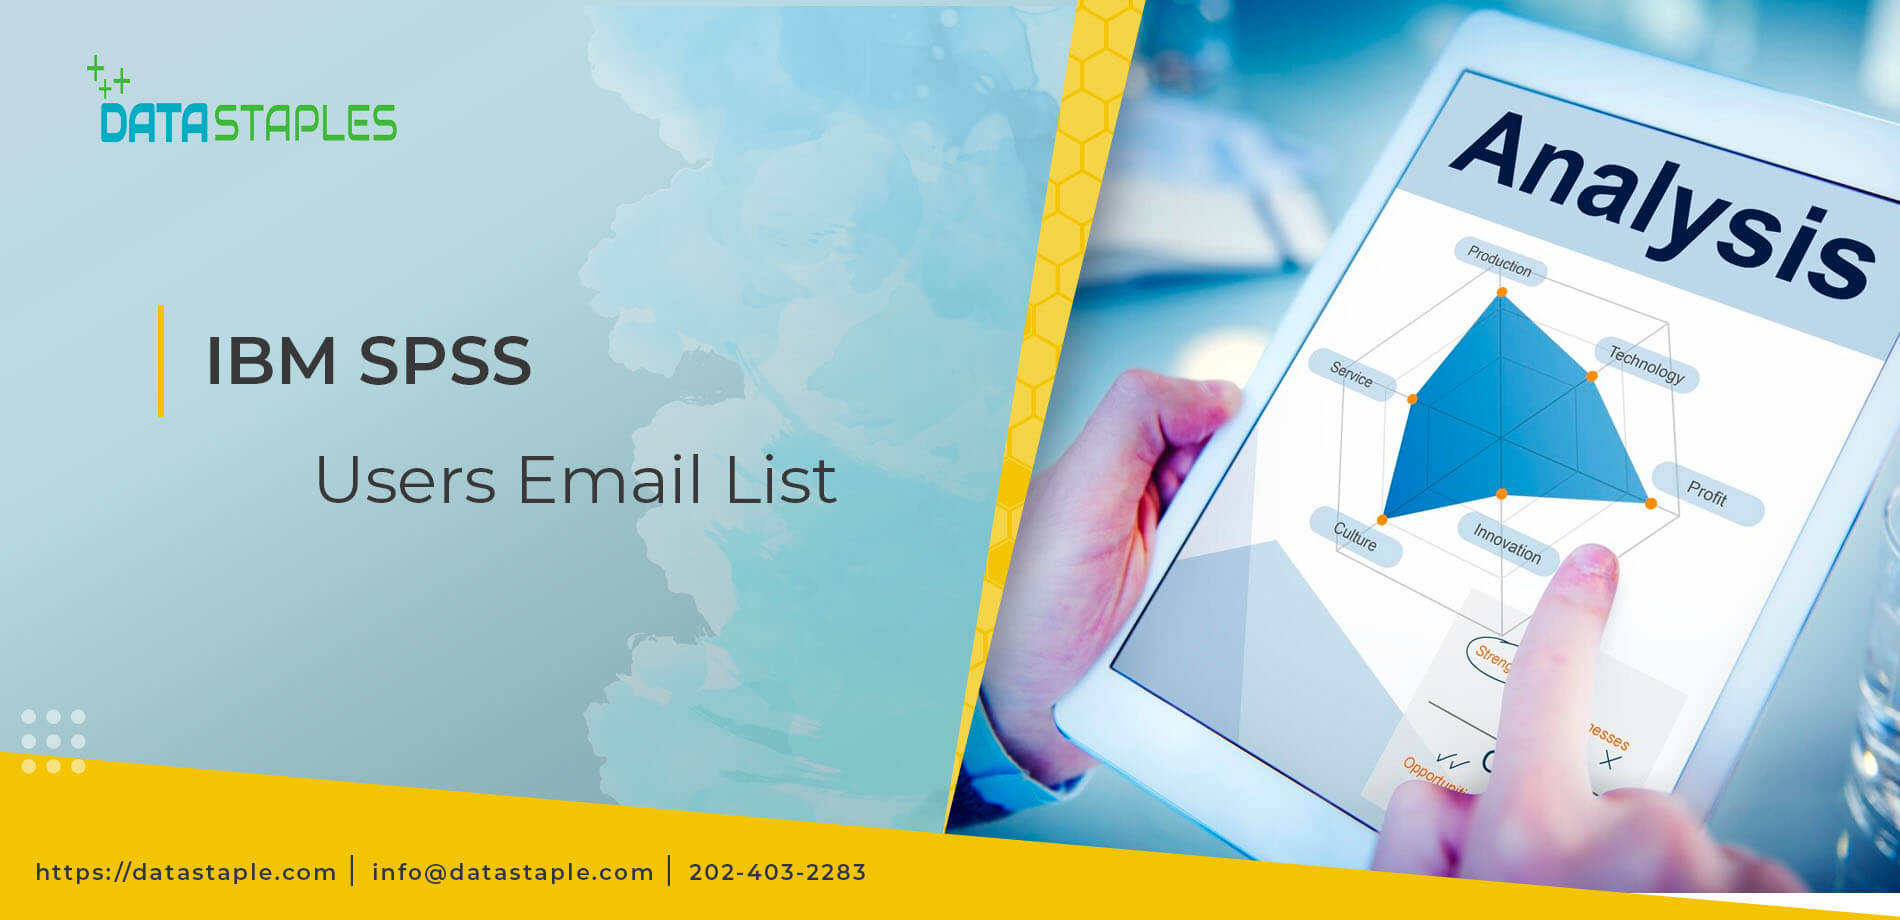 IBM SPSS Users Email List | DataStaples